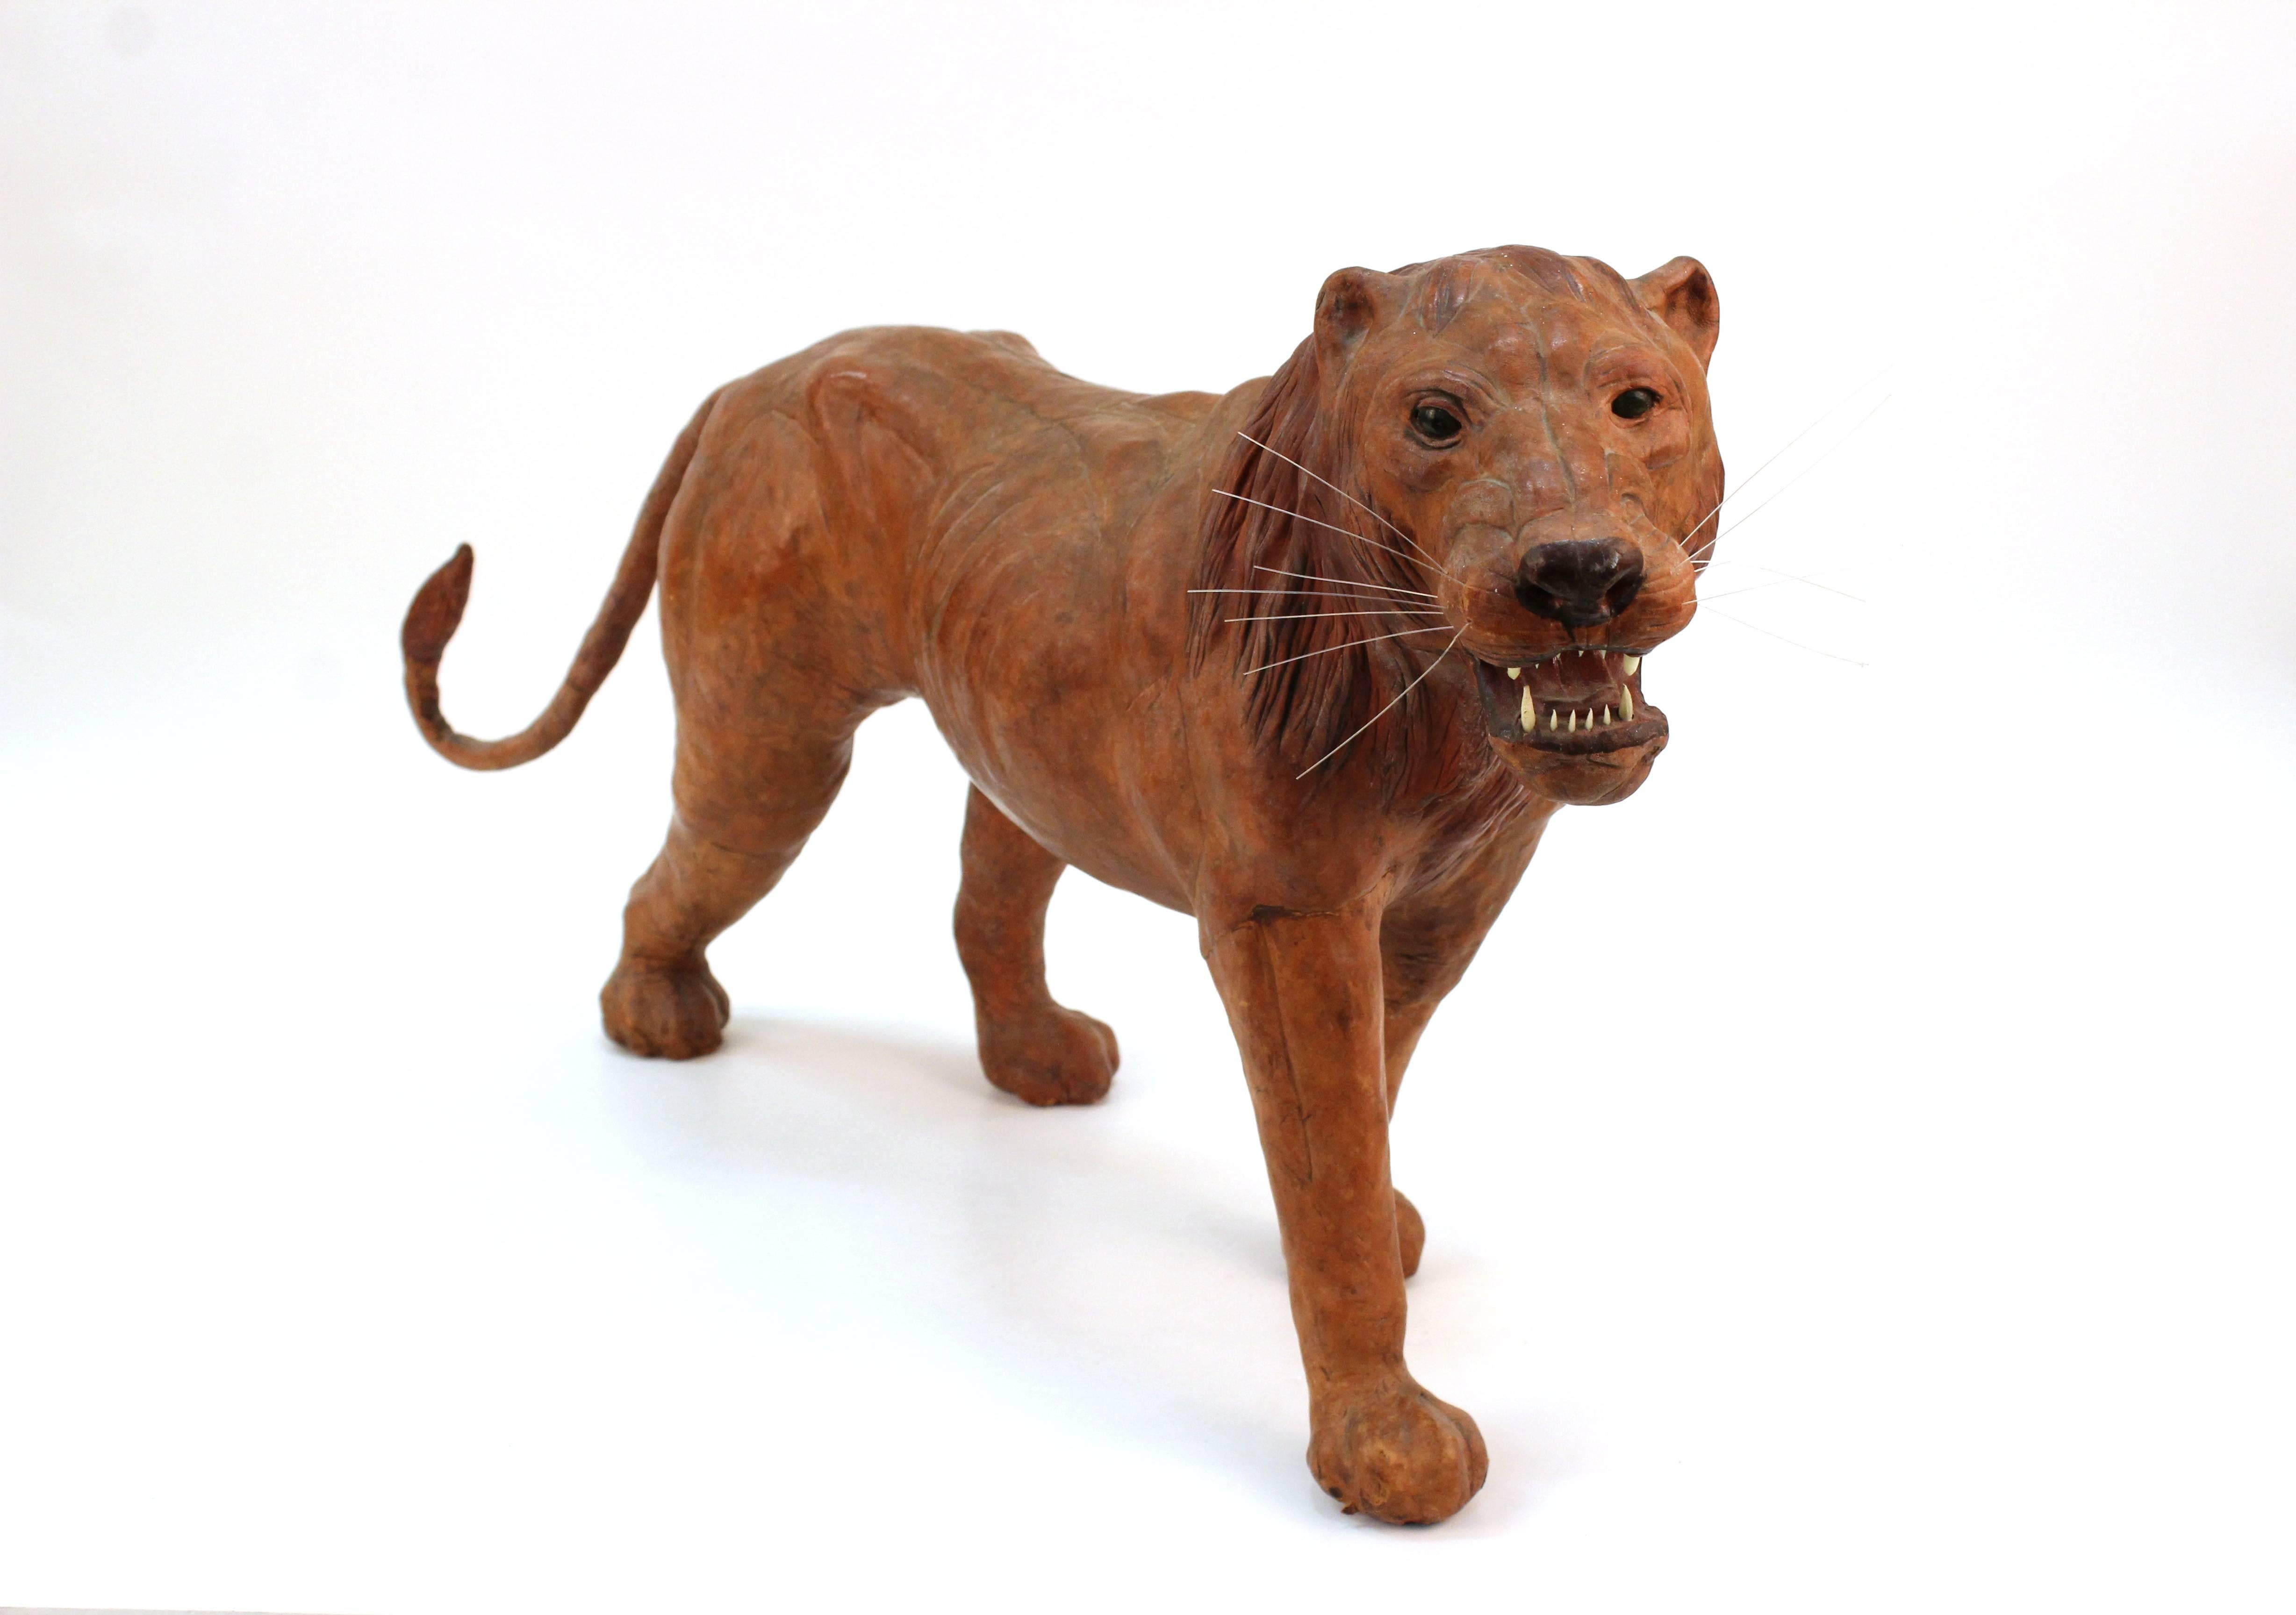 A sculpture of a prowling lion in rust colored leather. Includes lifelike whiskers and pronounced teeth. In good vintage condition.